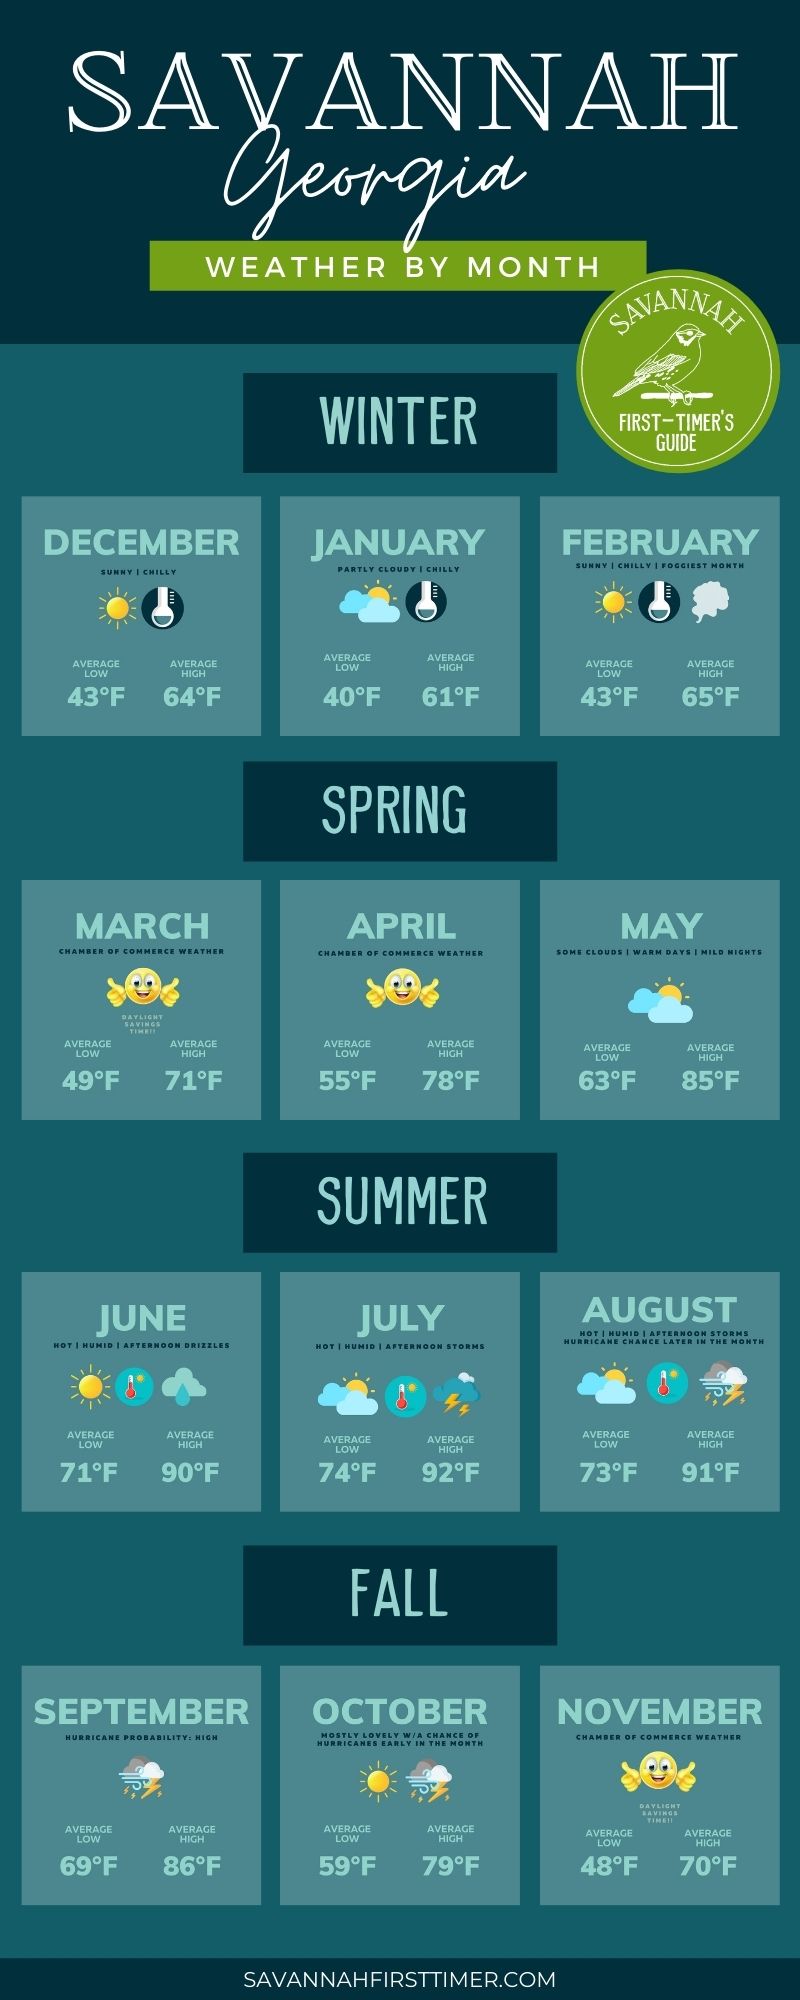 Infographic showing Savannah weather by month with icons for sun and storms, plus high and low temperatures and sunrise/sunset times